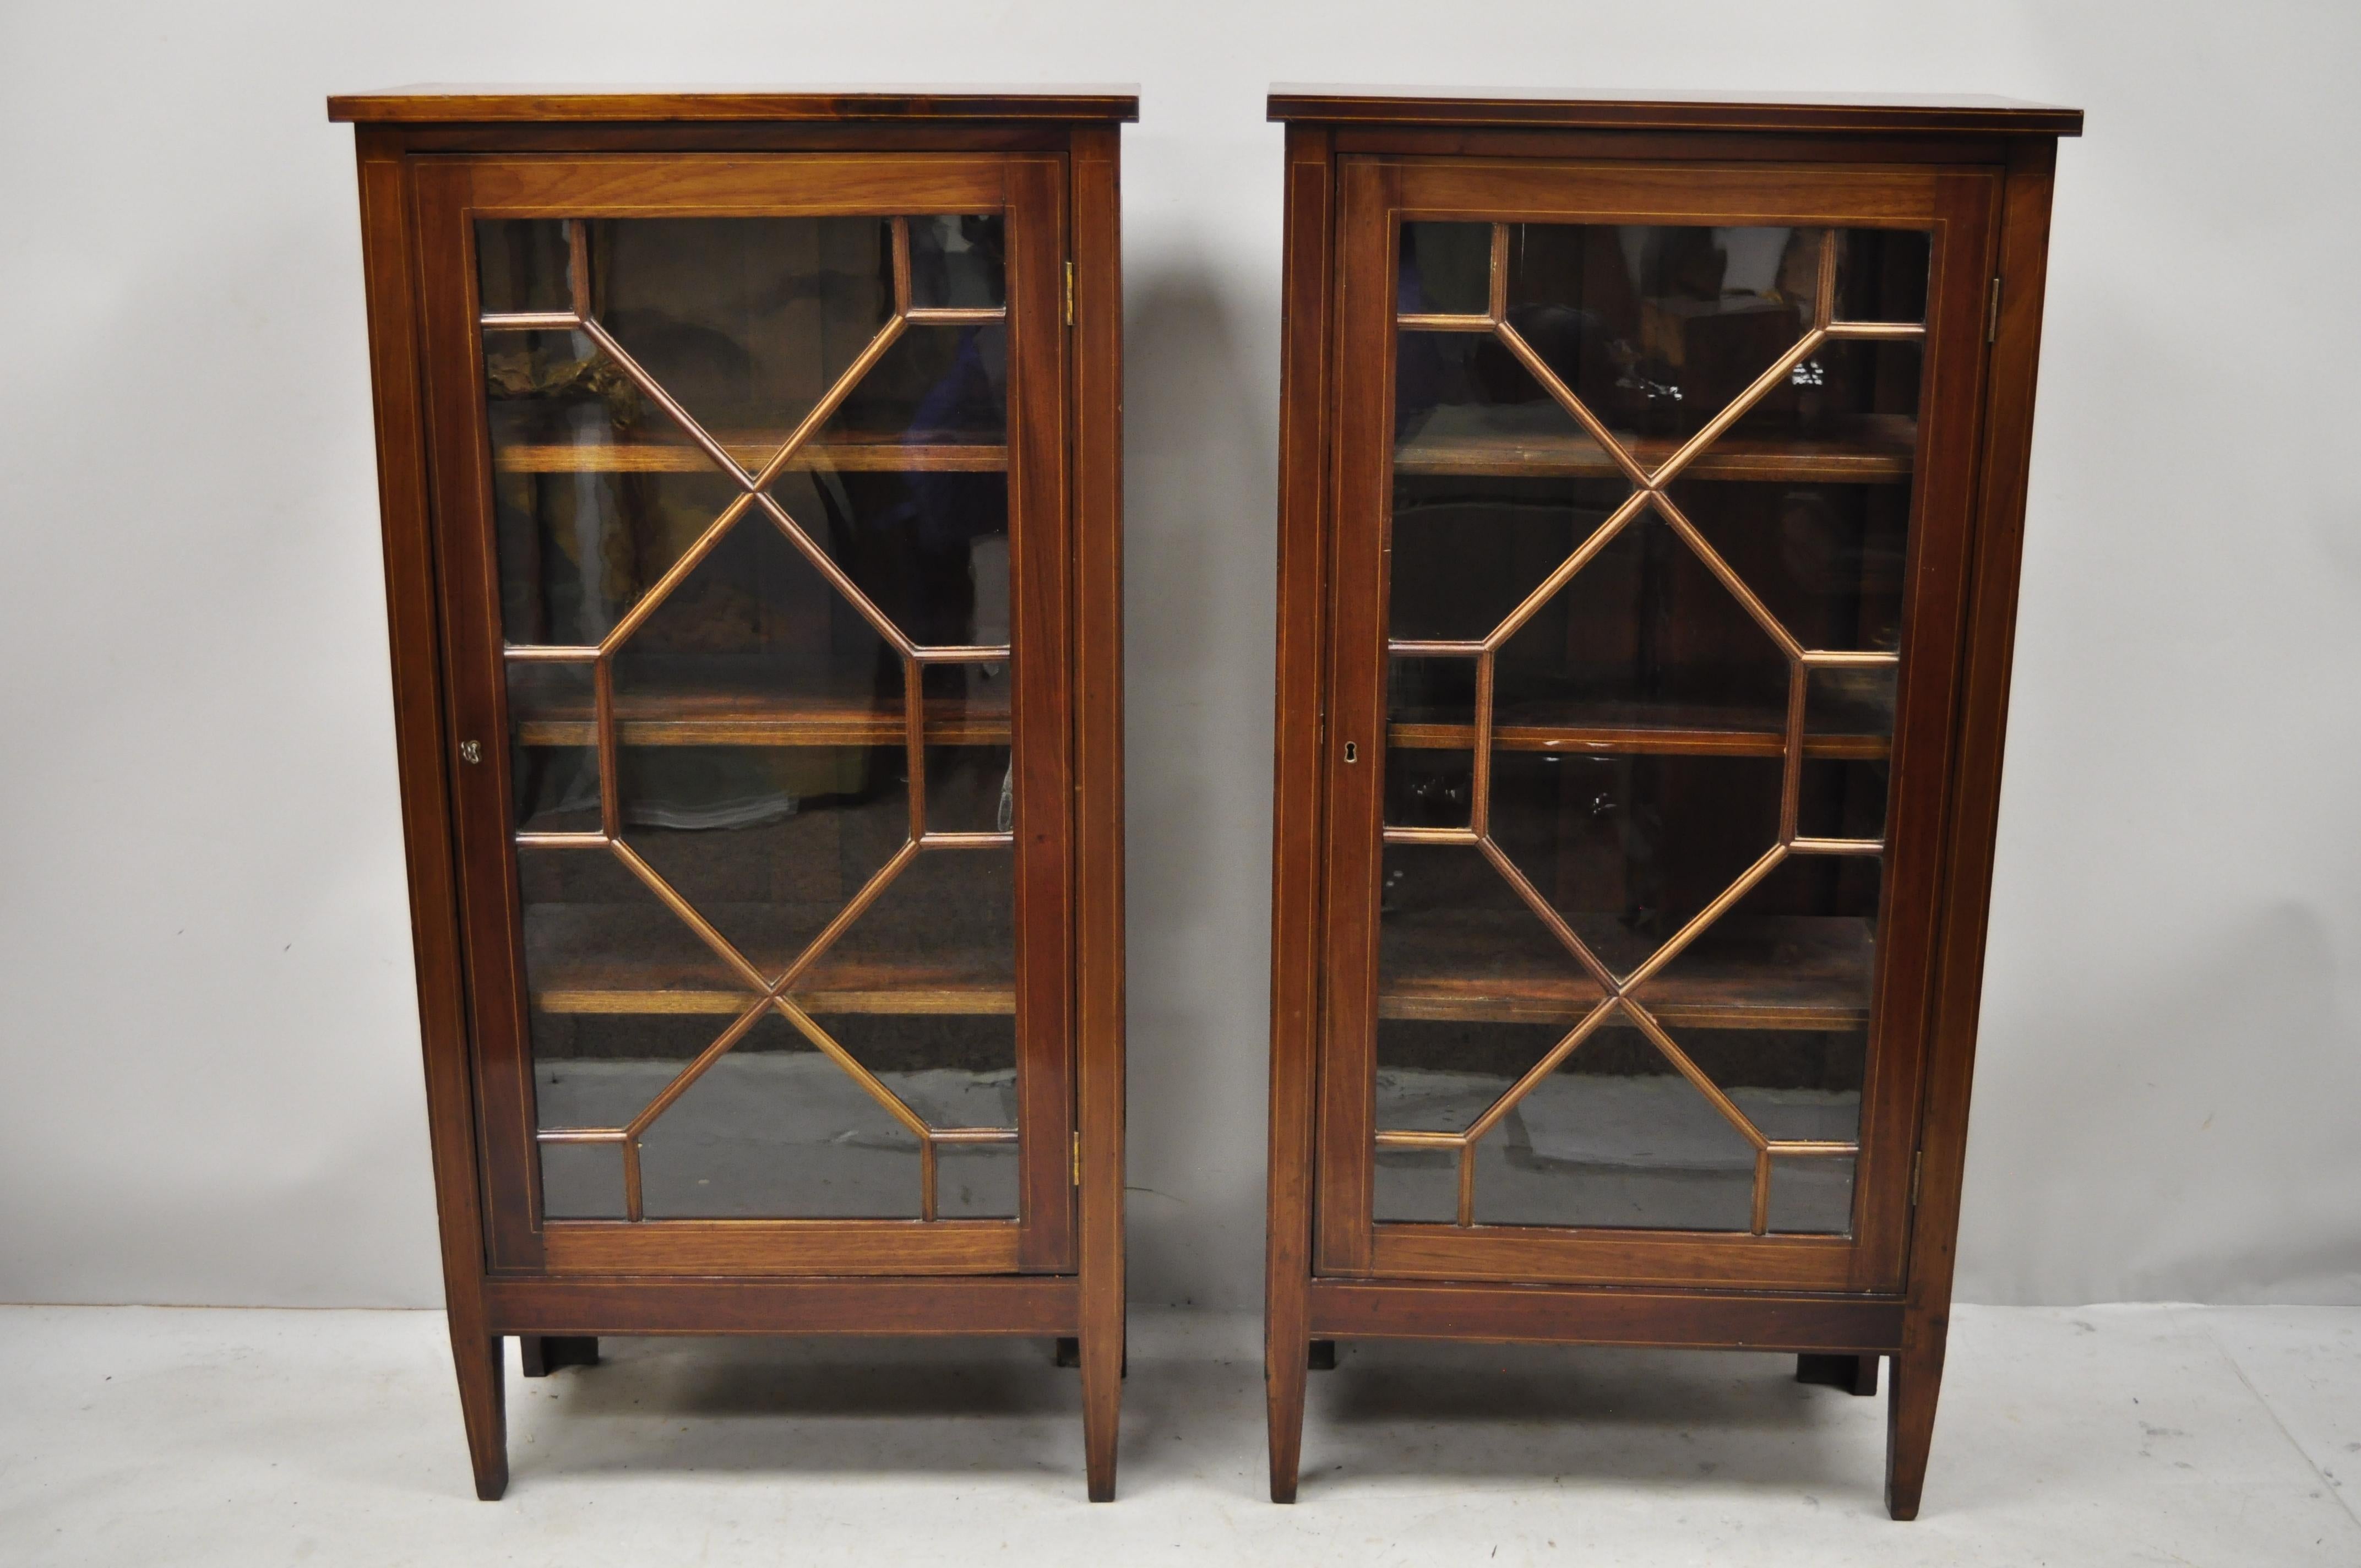 Pair of antique crotch mahogany inlaid Edwardian glass display cabinet curio bookcases. Listing features satinwood pencil inlay, individual panes of glass, glass sides, lattice doors, nice smaller size, solid wood construction, beautiful wood grain,